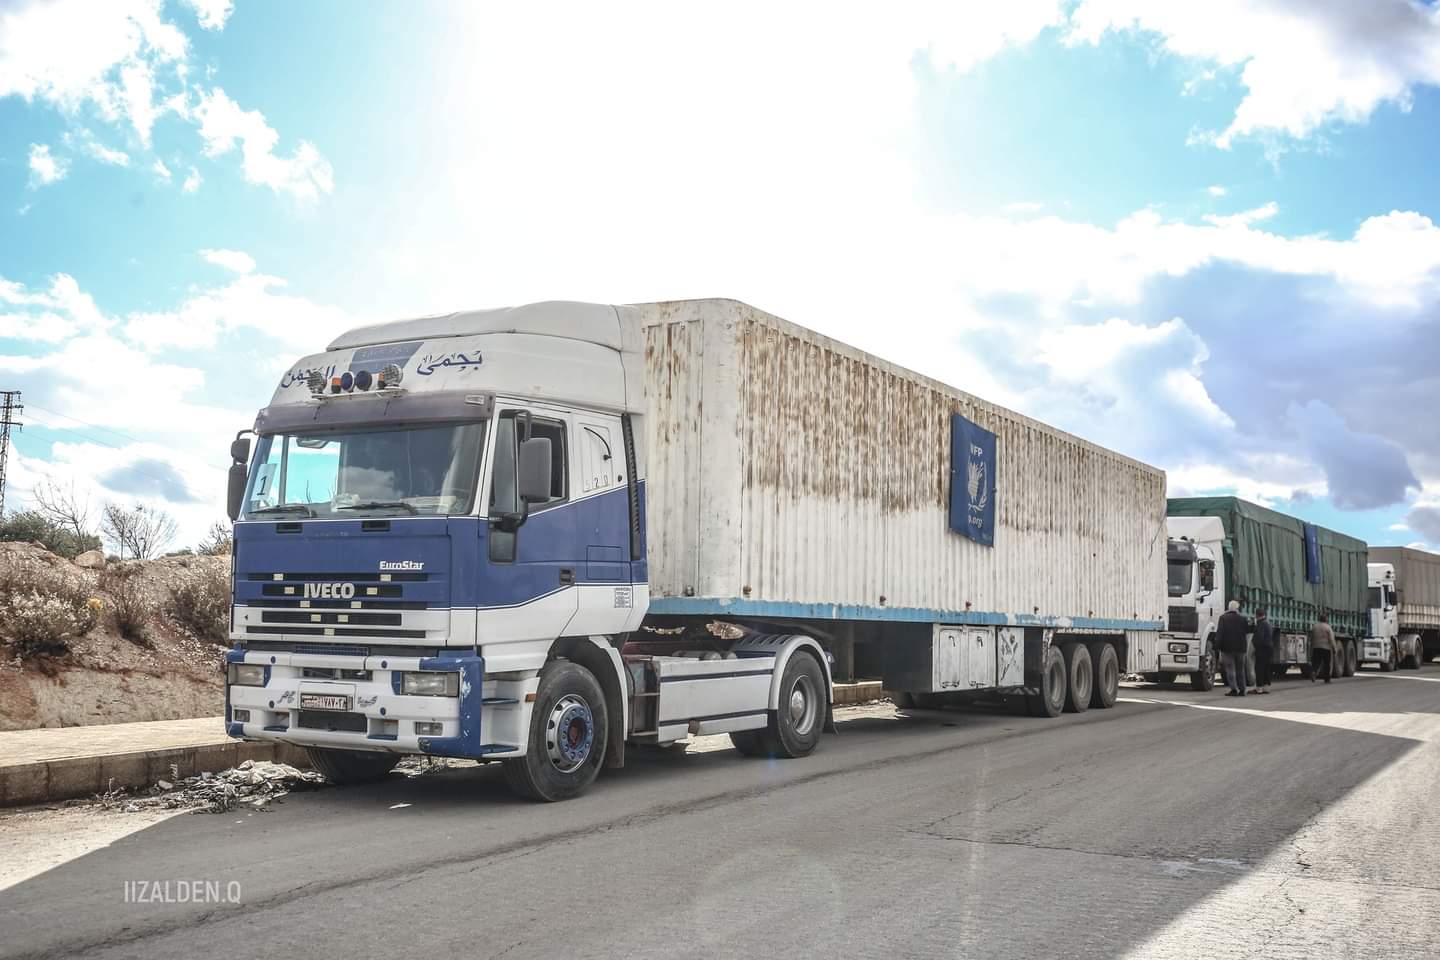 Trucks carrying humanitarian aid provided by the World Food Programme (WFP) to northern Syria - 9 December 2021 (Izz al-Din al-Qasim/Twitter)